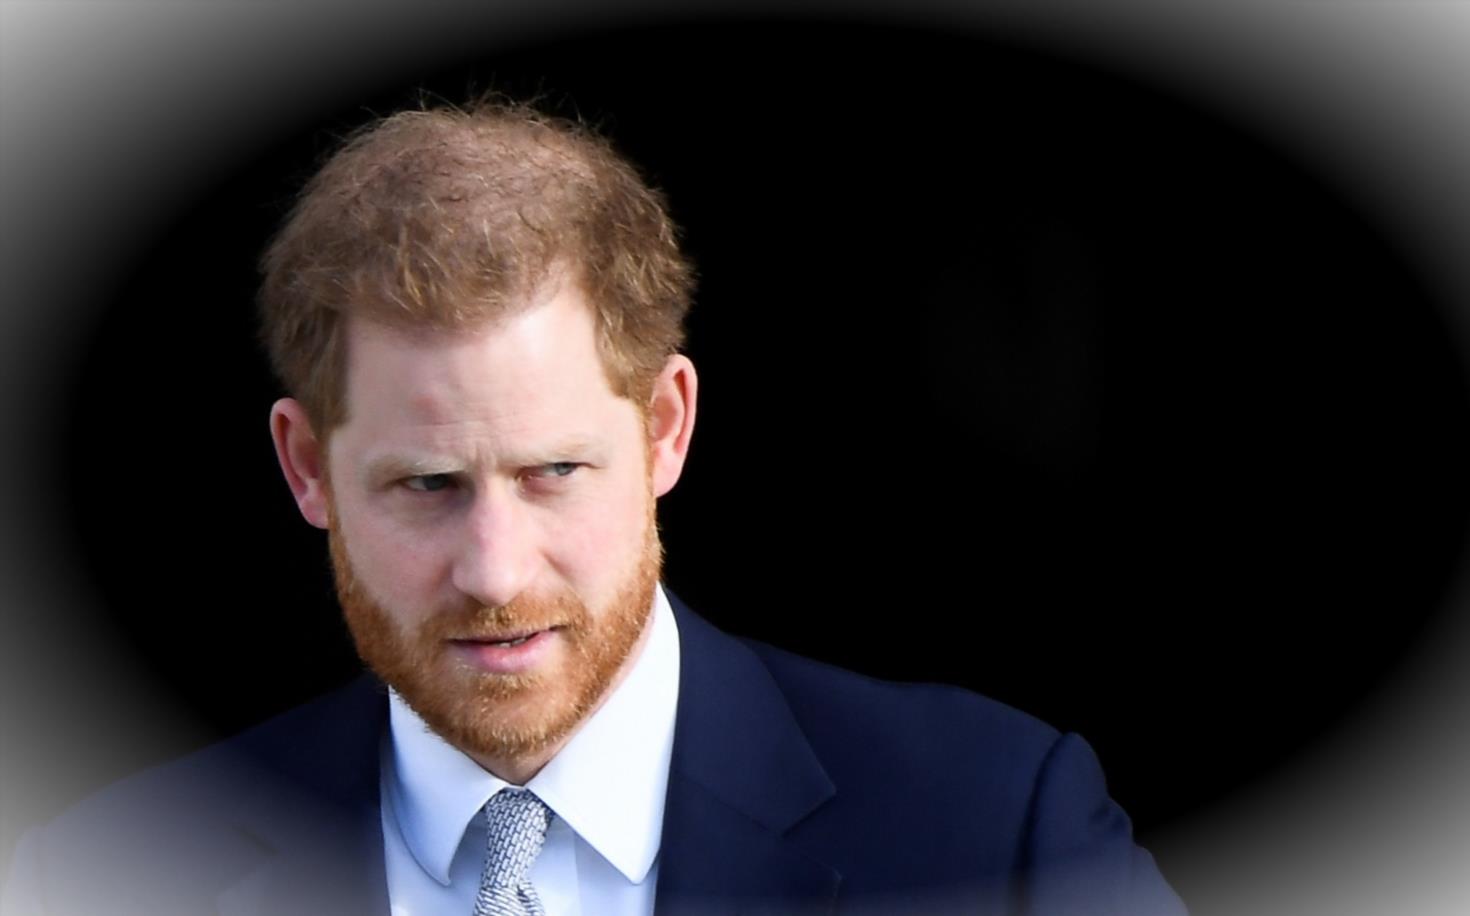 Prince Harry Faces Difficult Coronation Without Meghans Support81ee34w 7